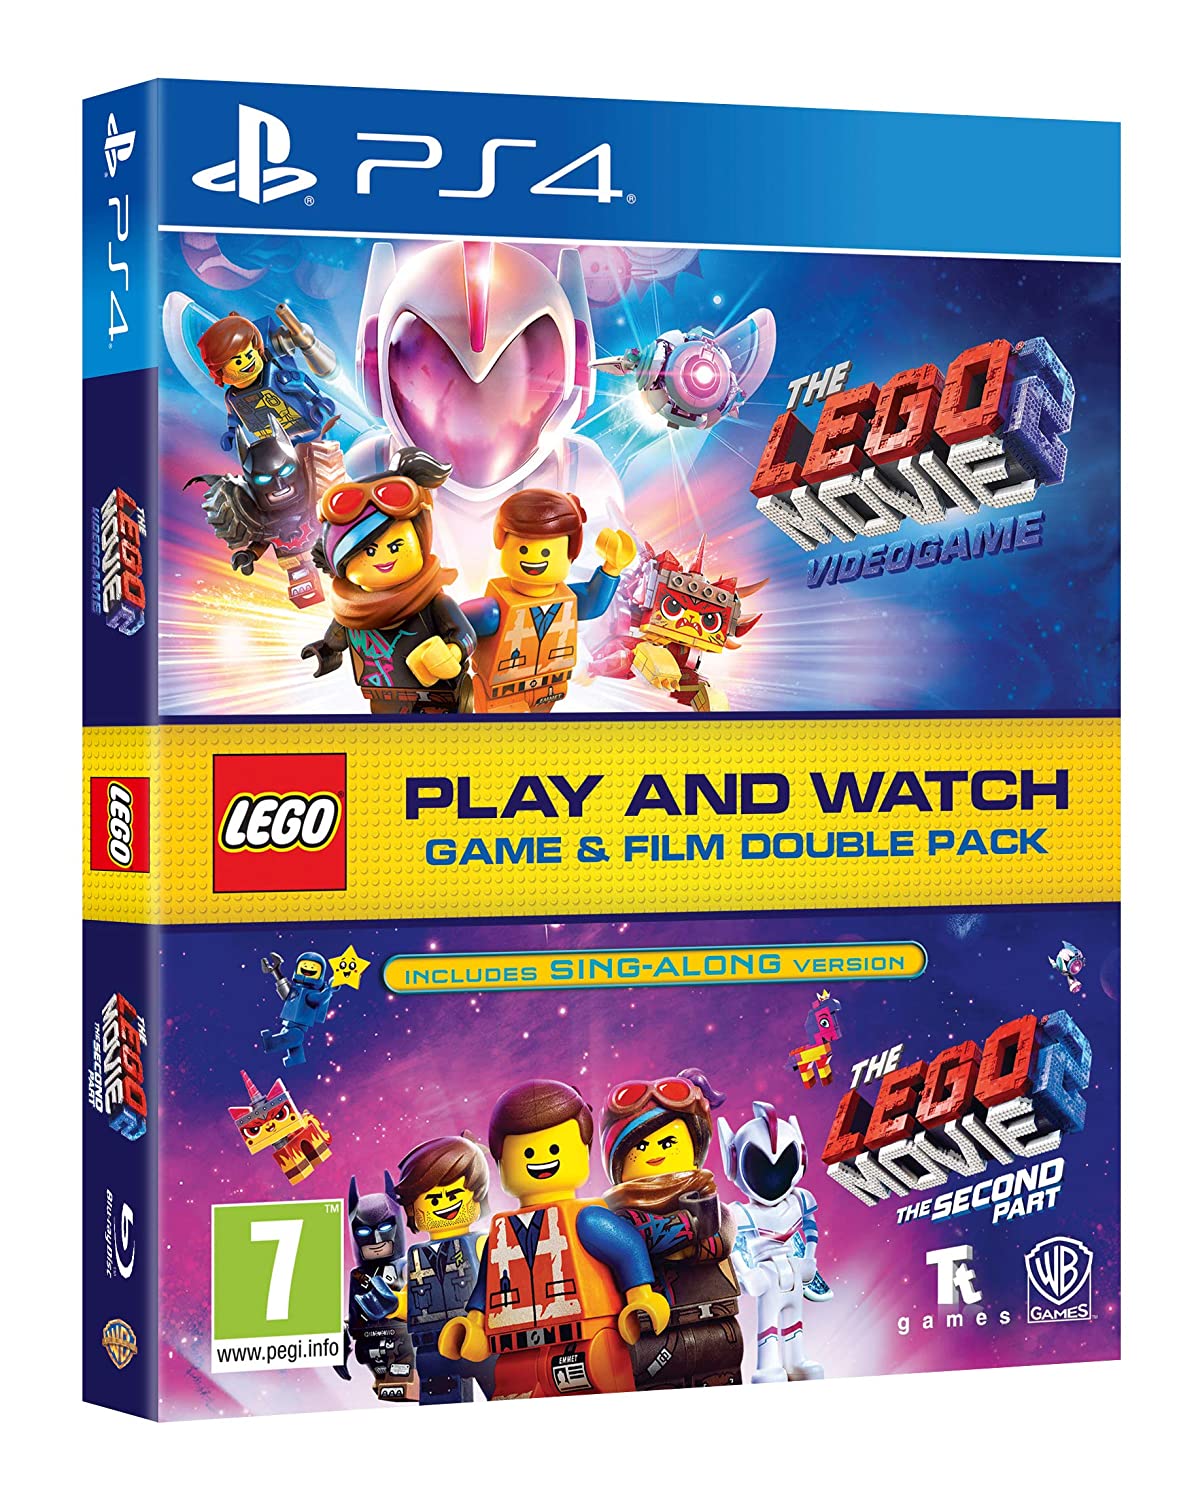 Lego Movie Videogame 2 Play and Watch Double Pack